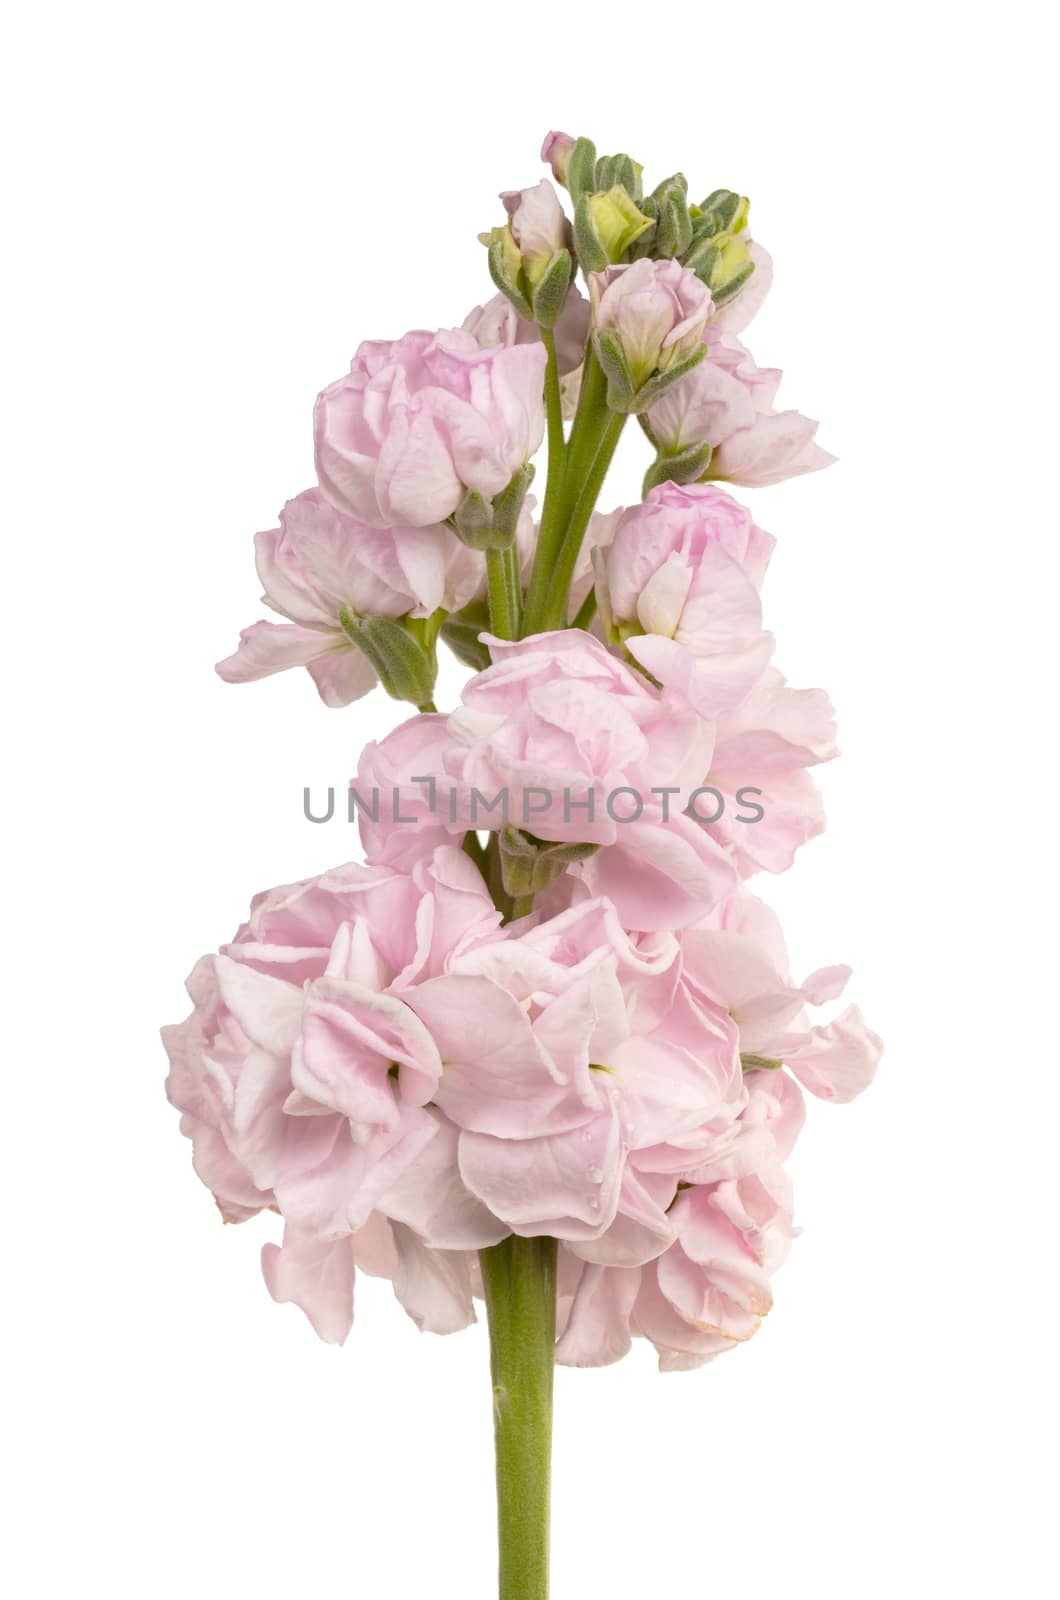 Fresh pink flower on a white background by michaklootwijk